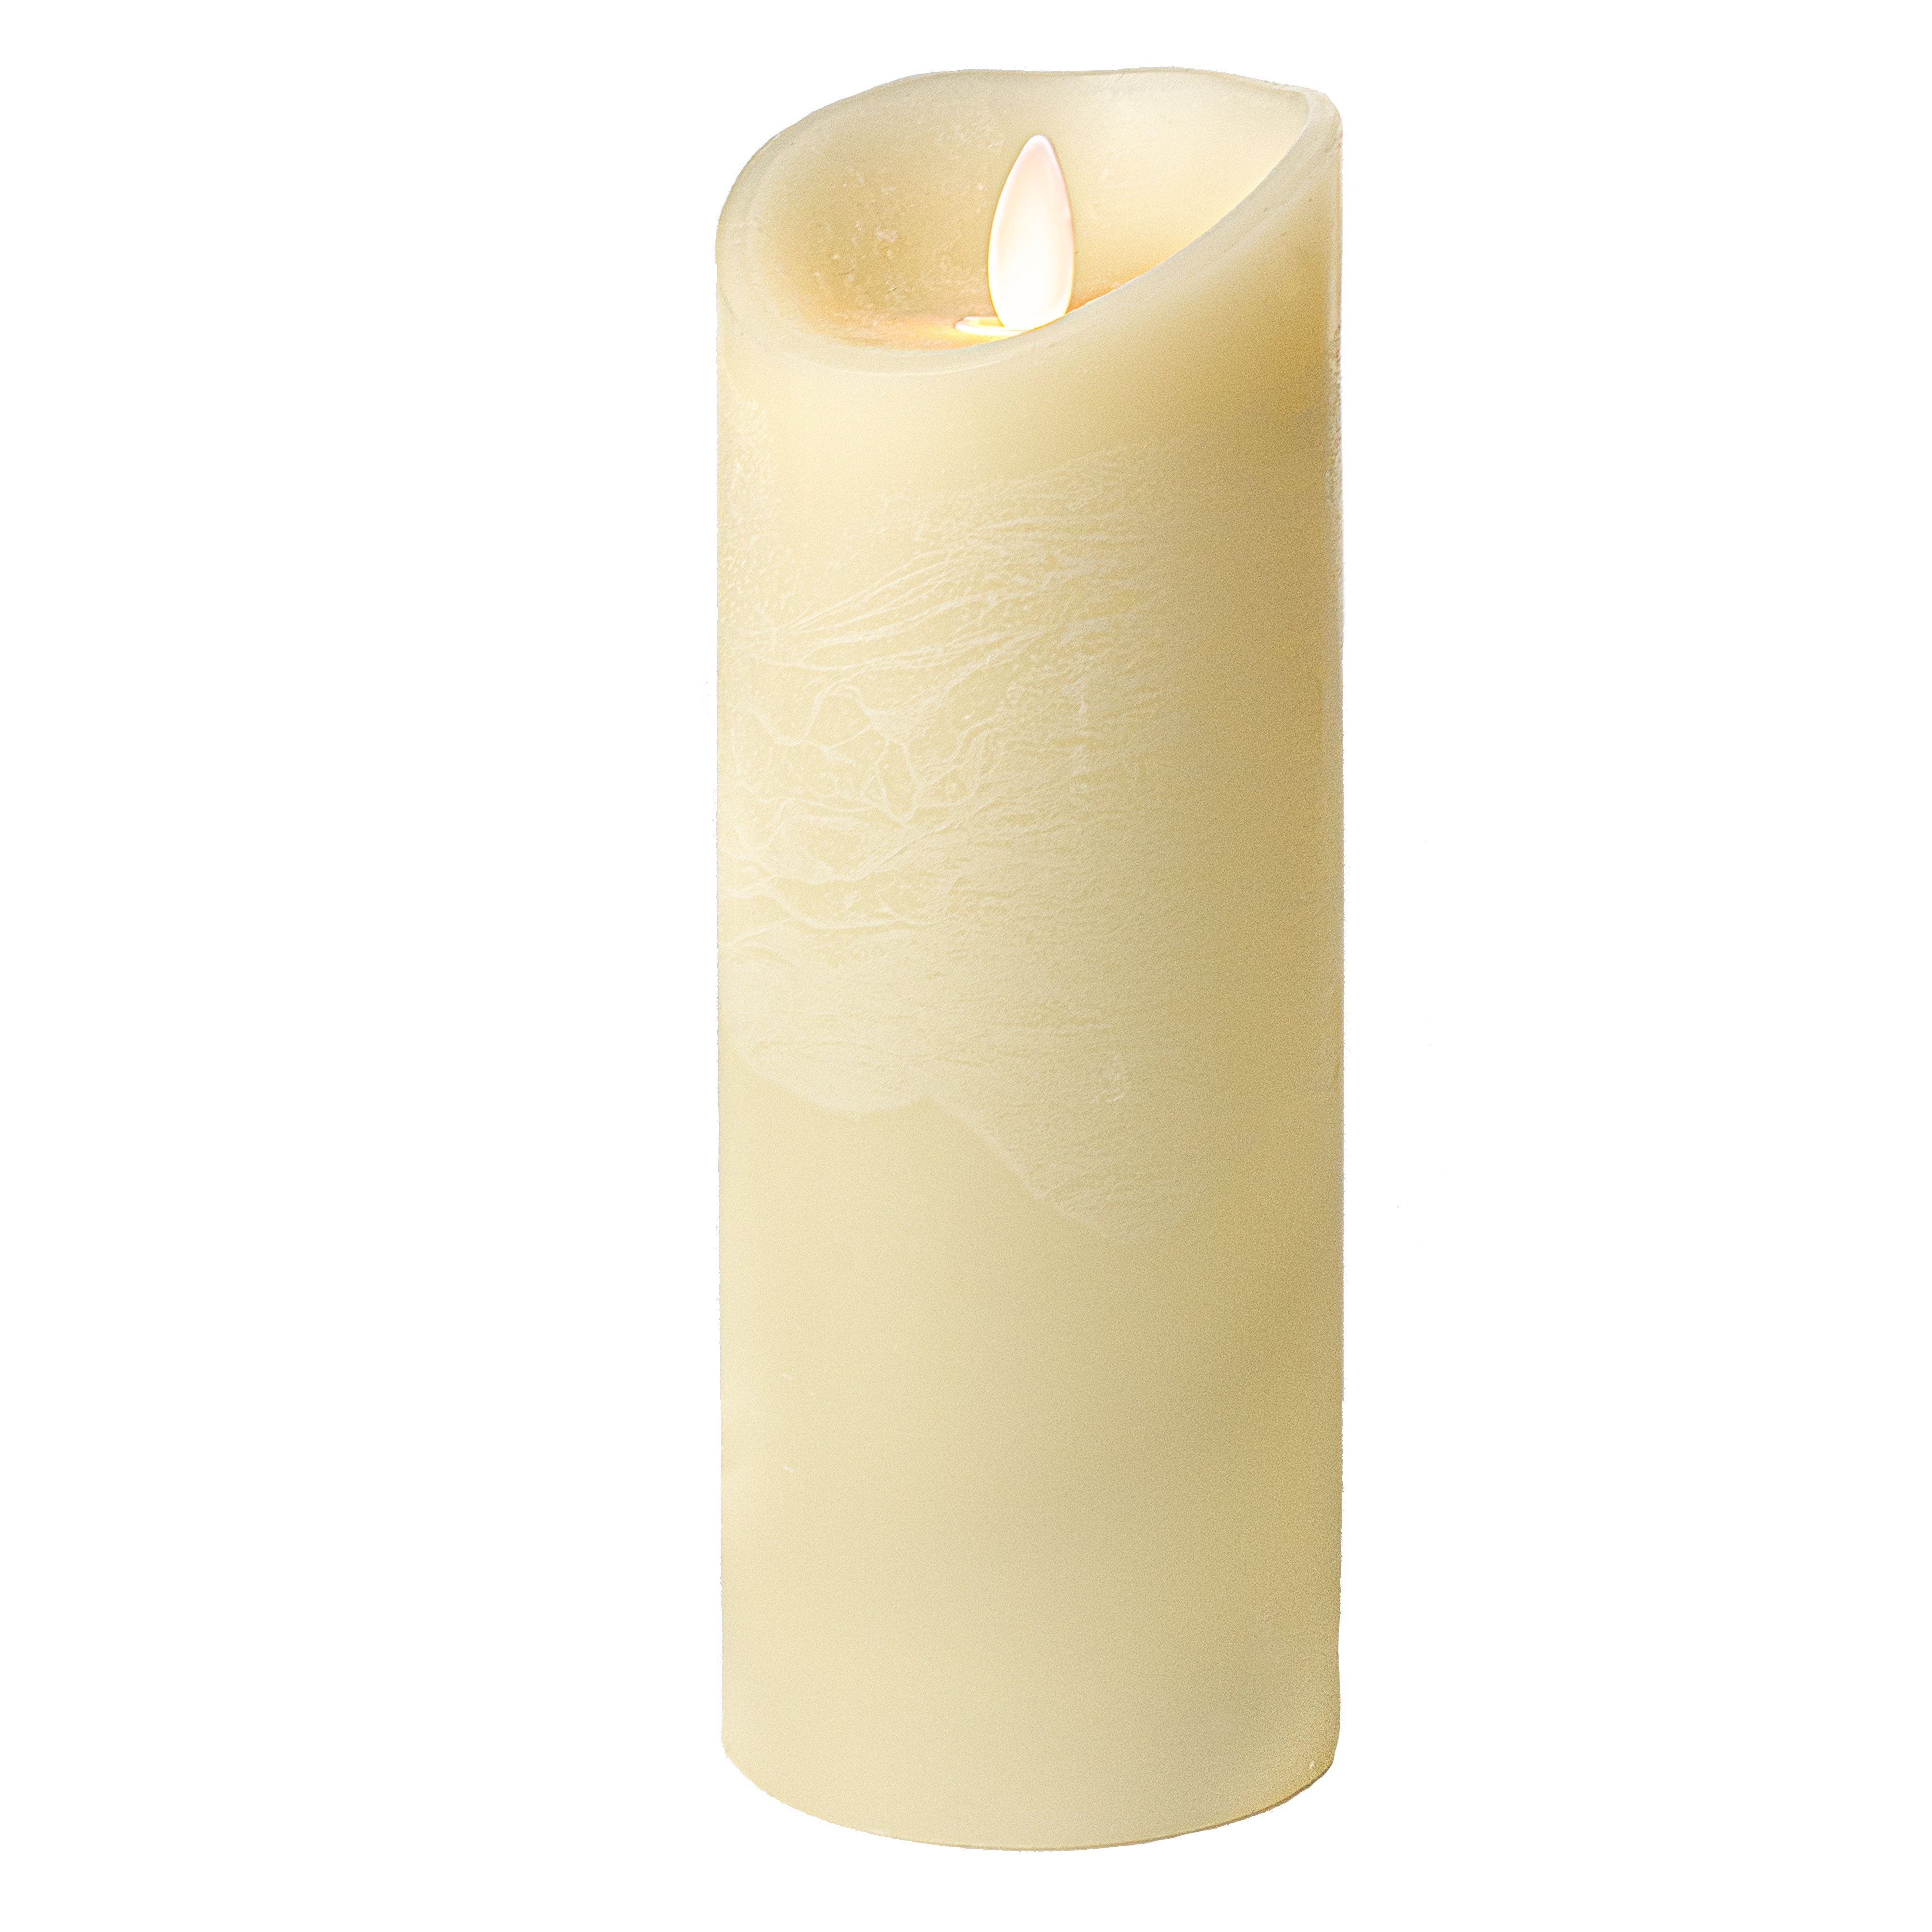 8" x 3" Ivory Flameless Candle